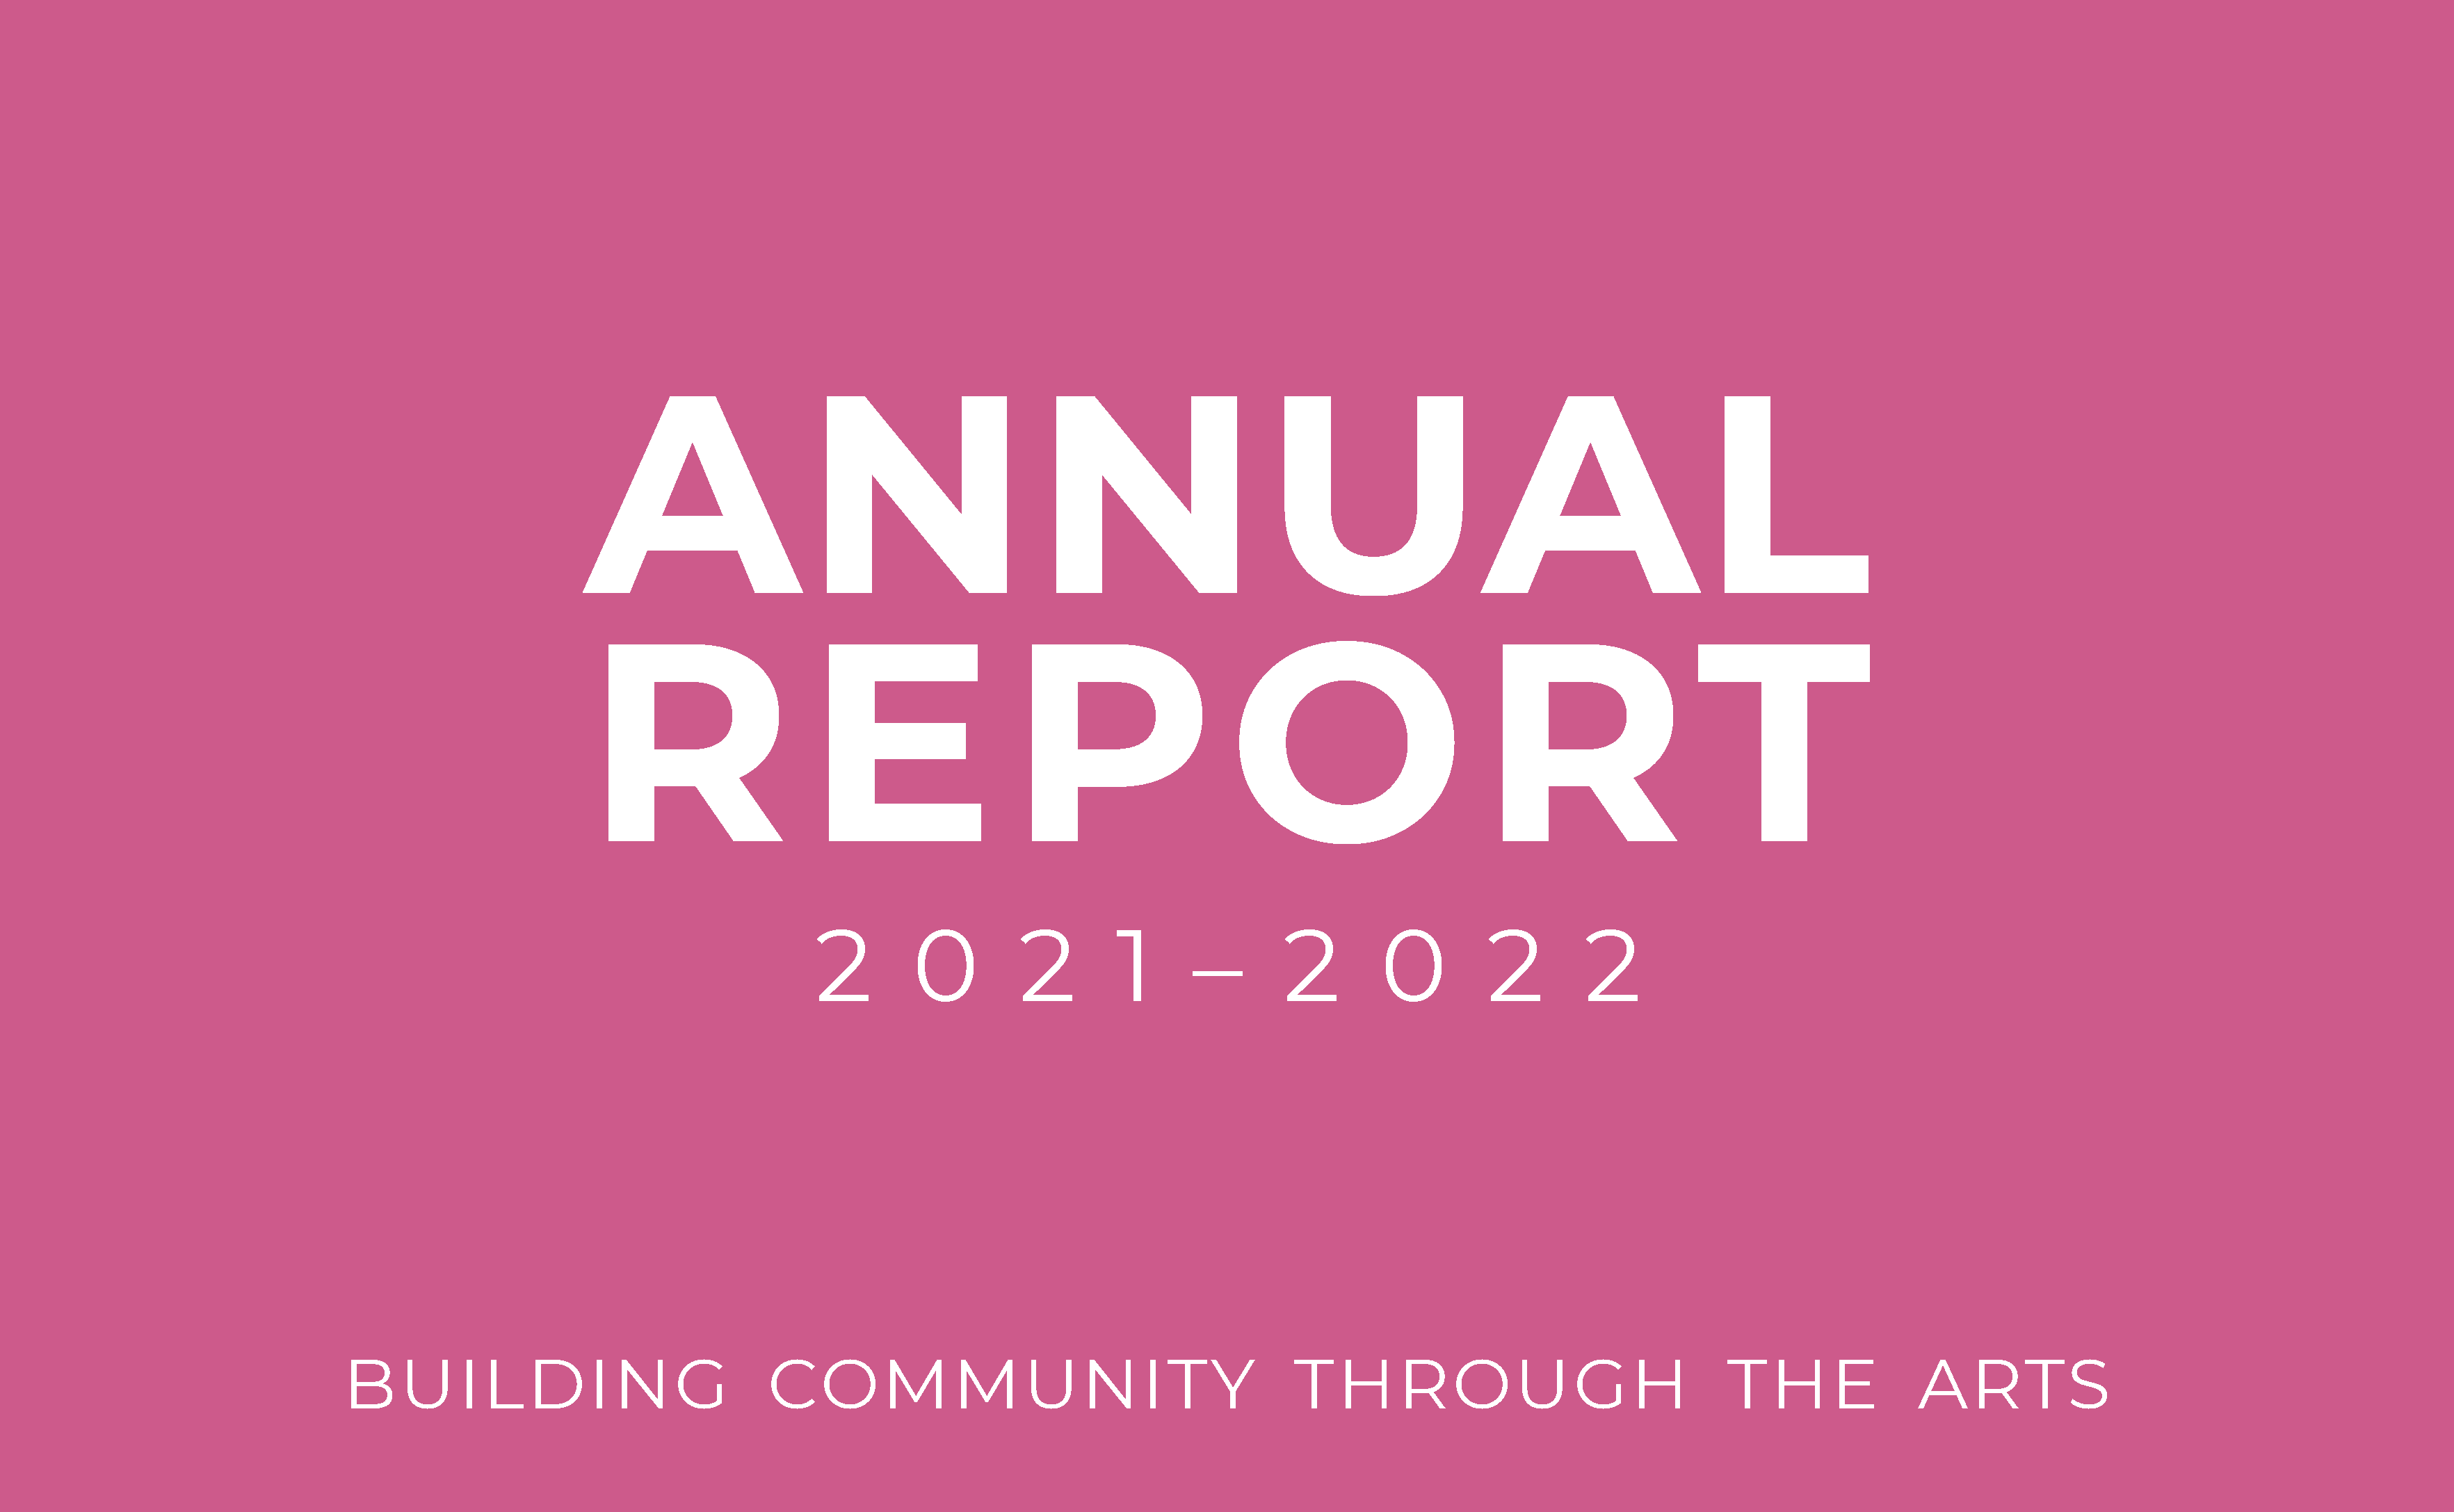 View the Arts Council of Princeton's Annual Report